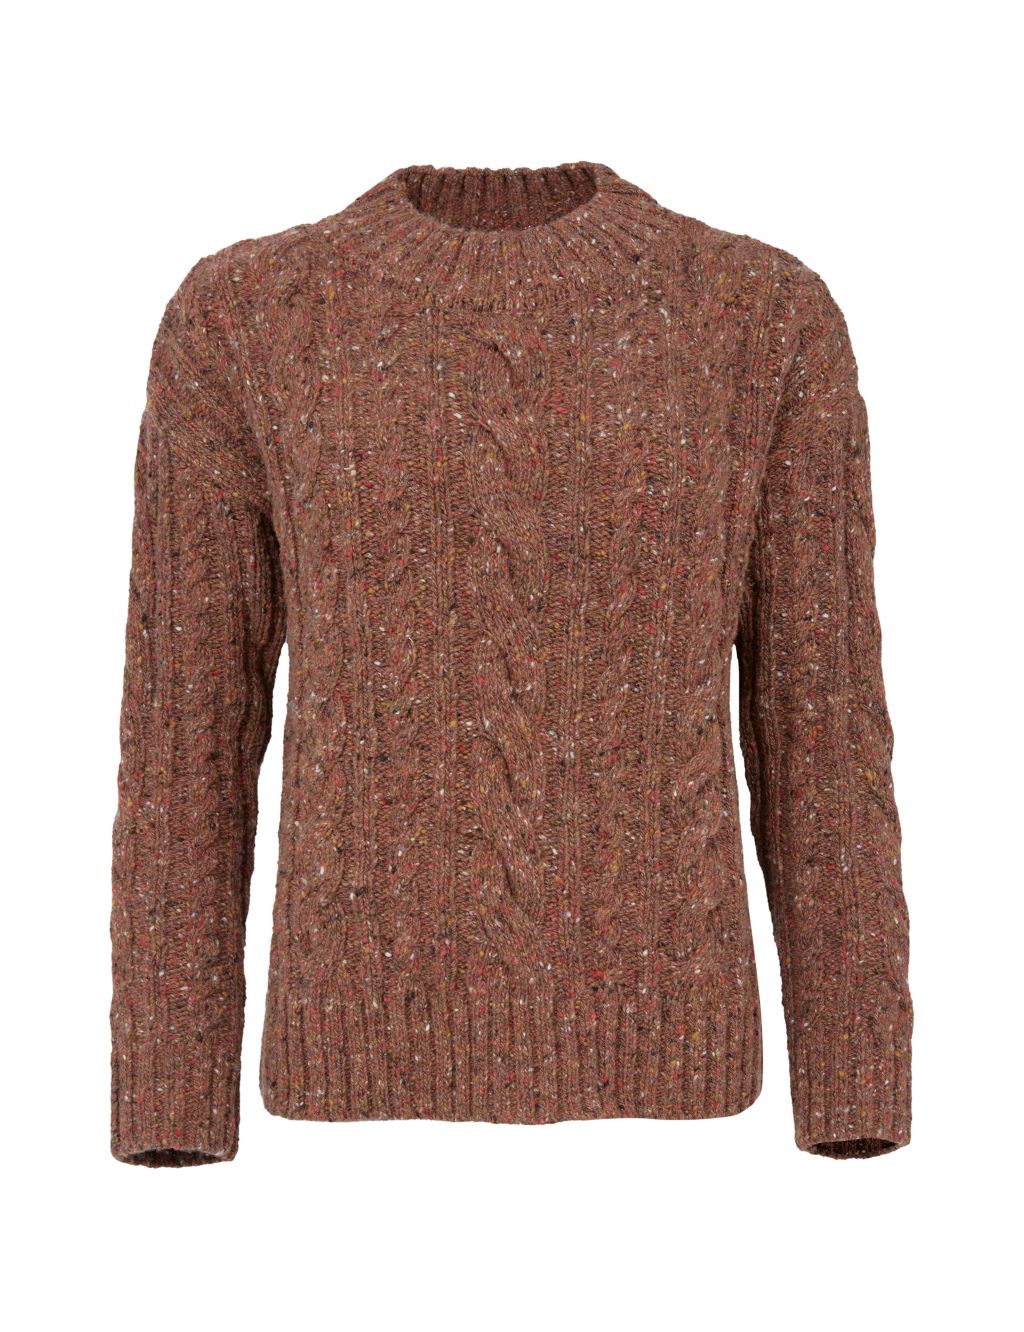 Pure Wool Cable Knit Crew Neck Jumper image 7